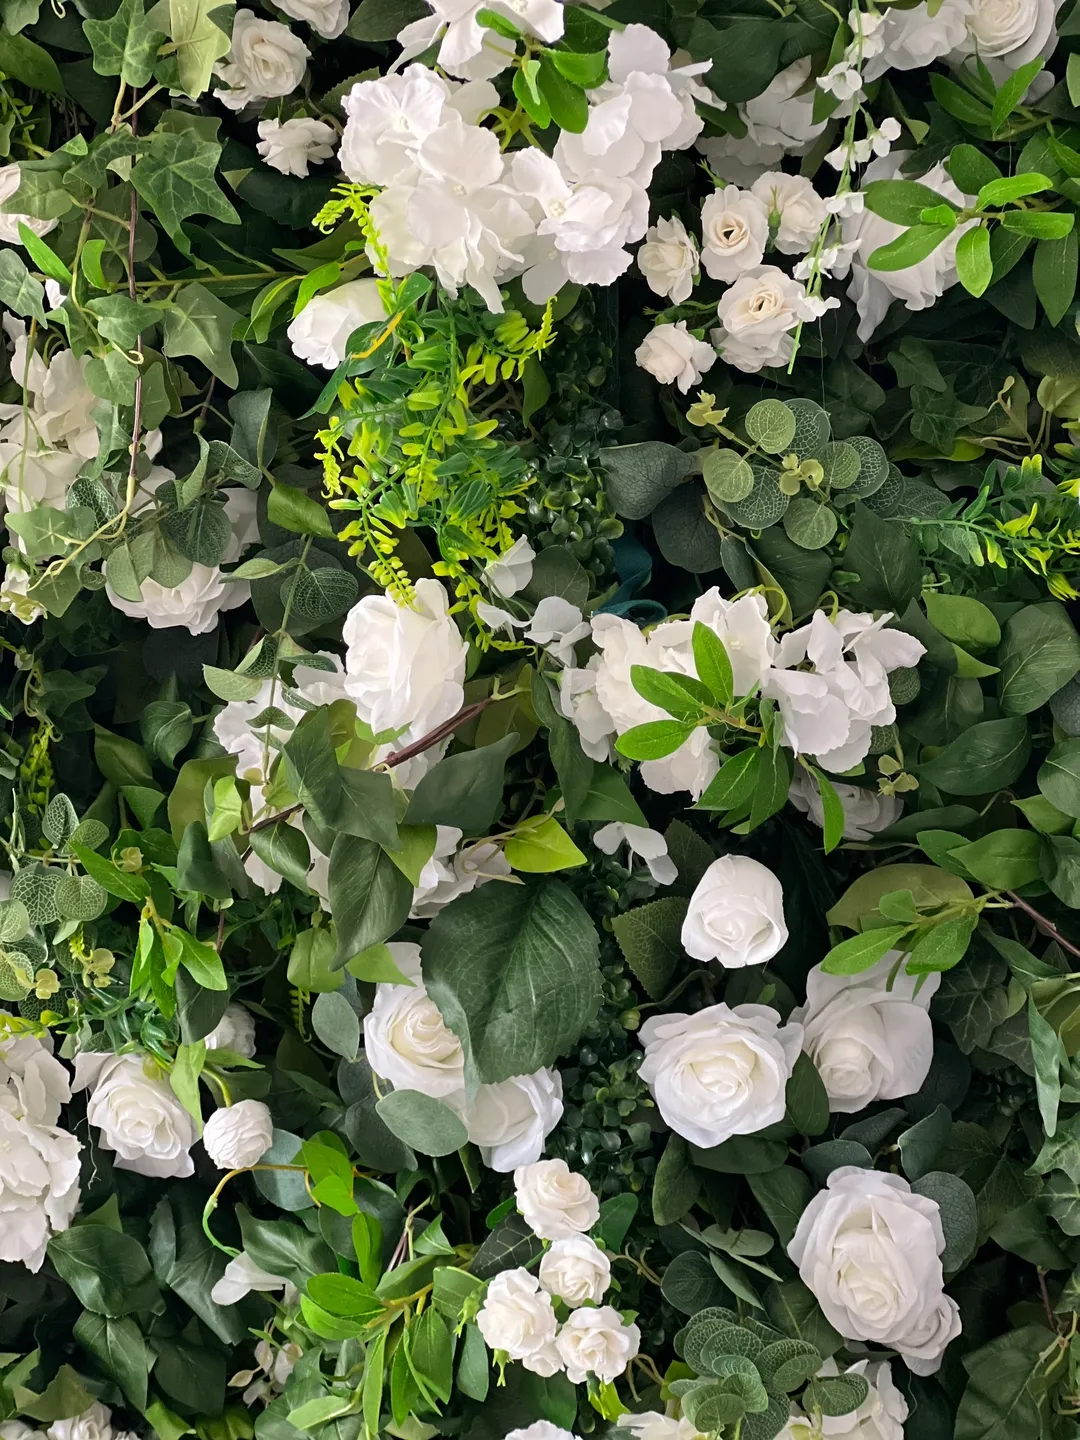 A wall of flowers with green leaves and white roses.